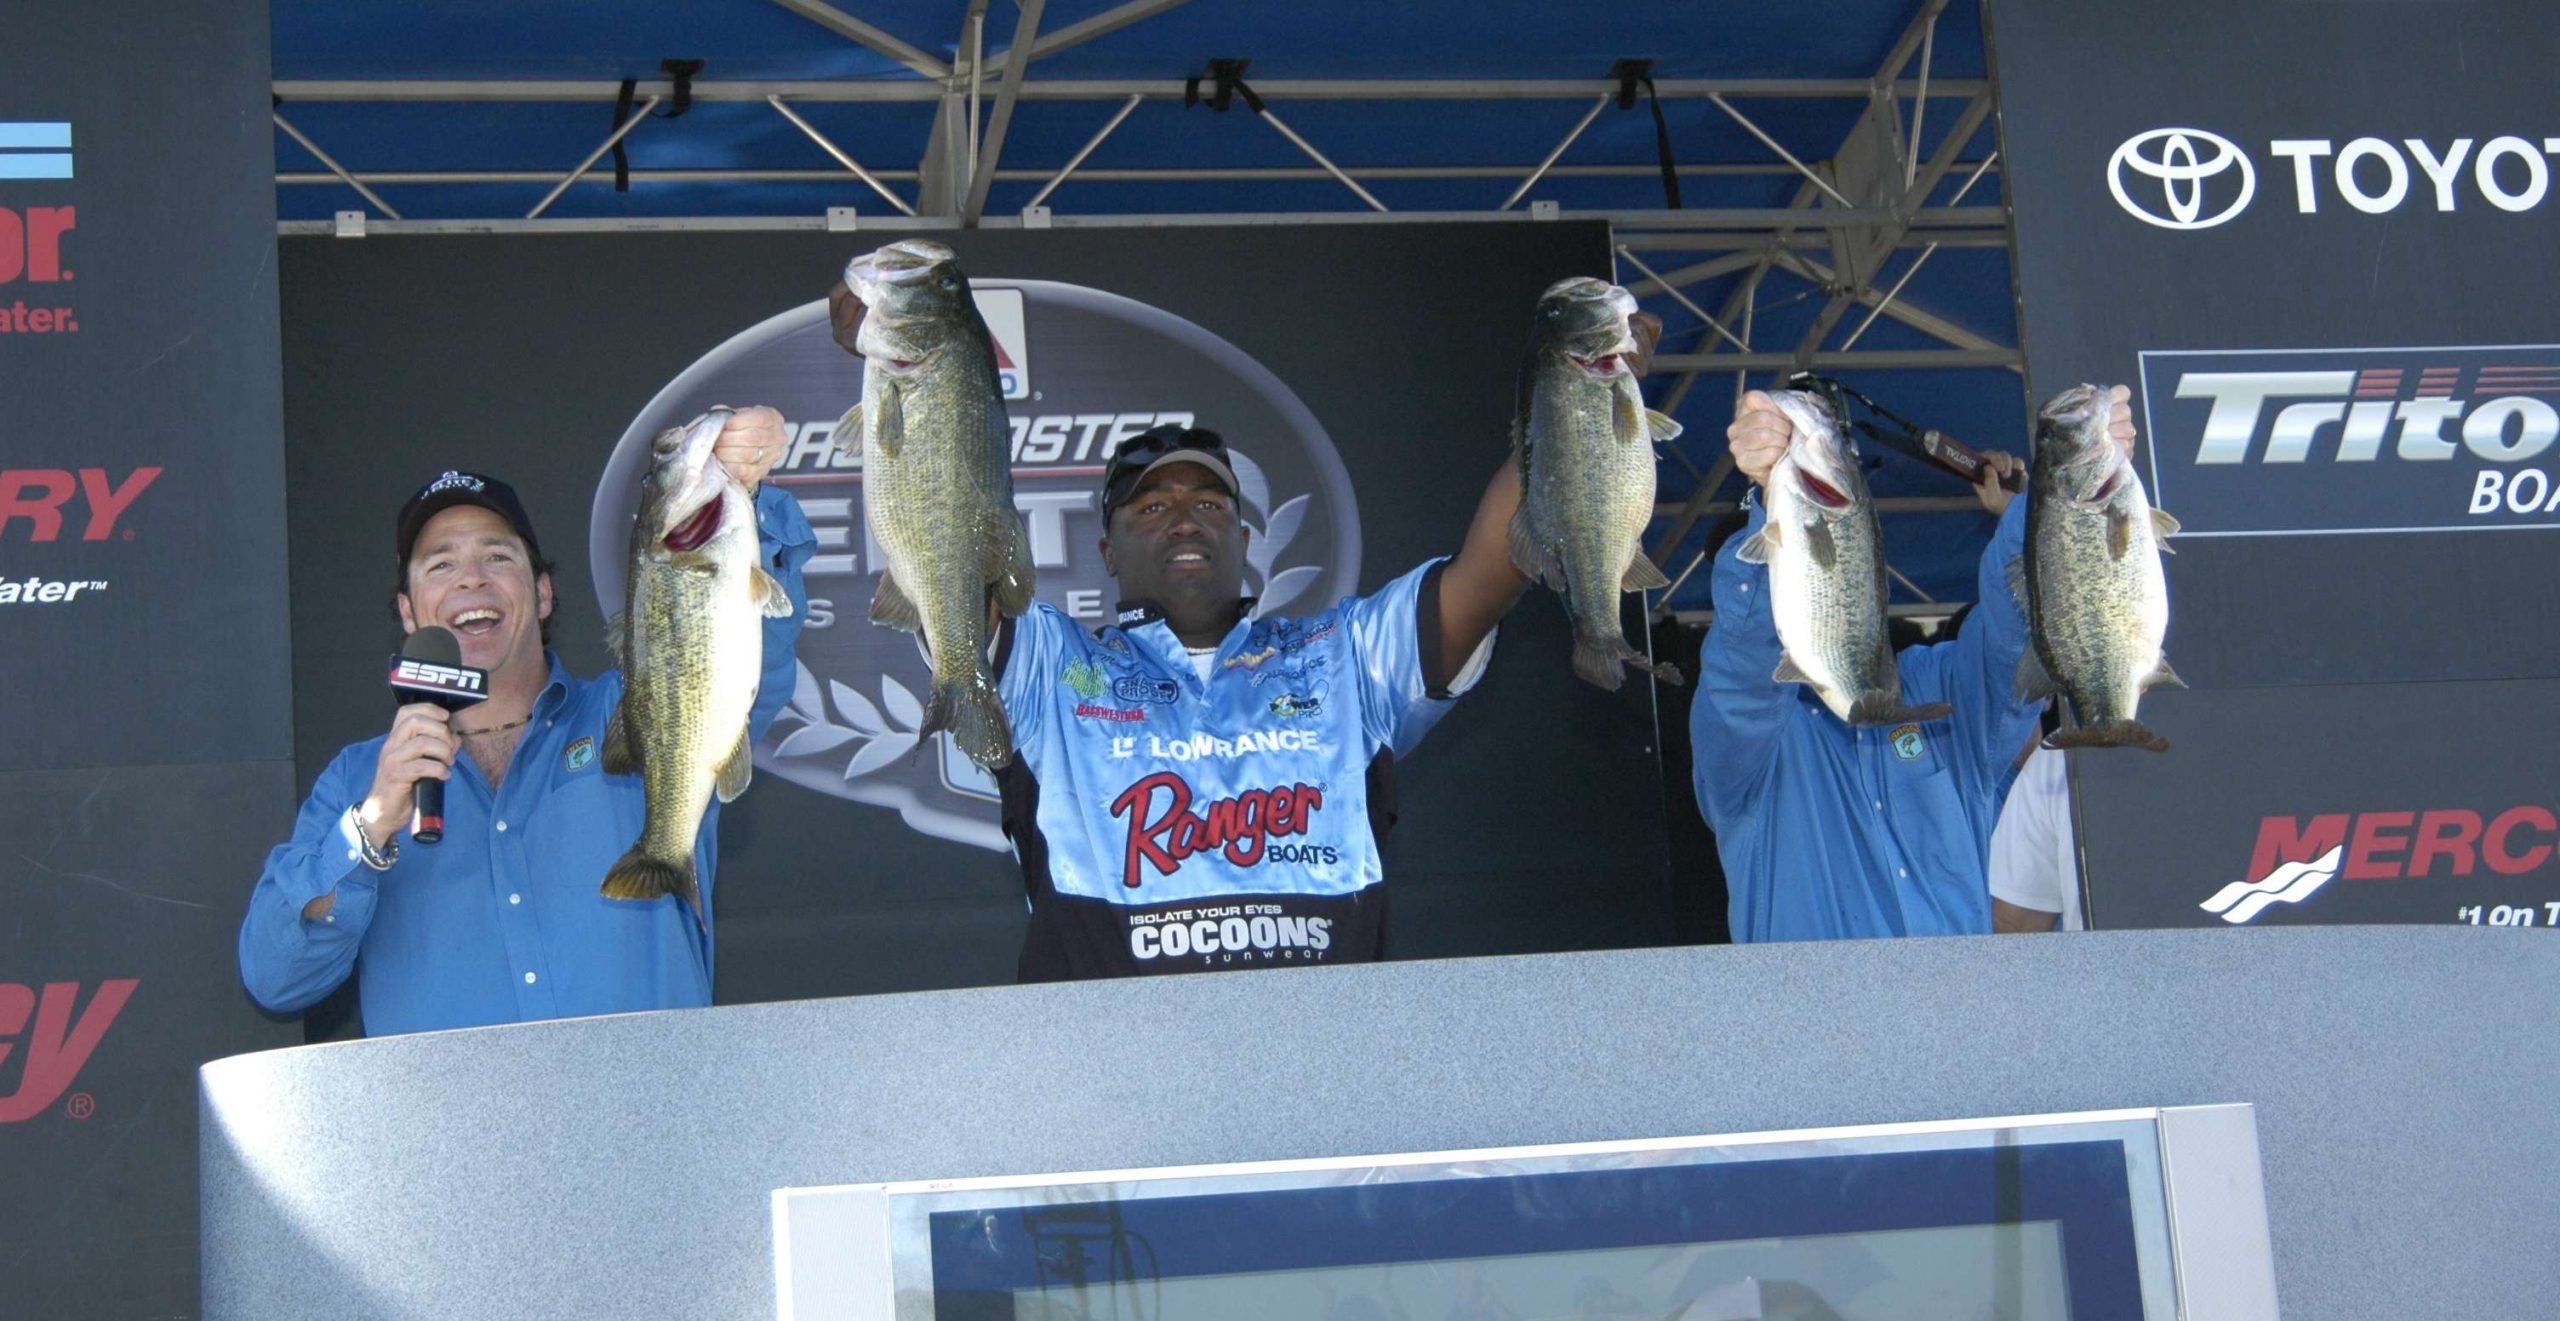 <b>The Elite on Amistad, March 2006</b><br>

This one is first on my list, and not because I won it. The idea behind the Bassmaster Elite Series is (was) to see what could the best anglers doâ¦on the best bass watersâ¦at the best time of the year. We answered that. The winning weight was 104 pounds, 8 ounces. 
<p>
The other thing that Iâll always remember is that I saw, and might have had a chance at catching her had I played my cards right, a new world record largemouth. I saw her on a bed in practice. I didnât fish for her because I thought it would be cool to catch her during the tournament. When I went back on the first day she was gone.
<p>
And yes, I know she was that big. Iâve lived in California all my life. Iâve seen many giant bass. She was the new world record.